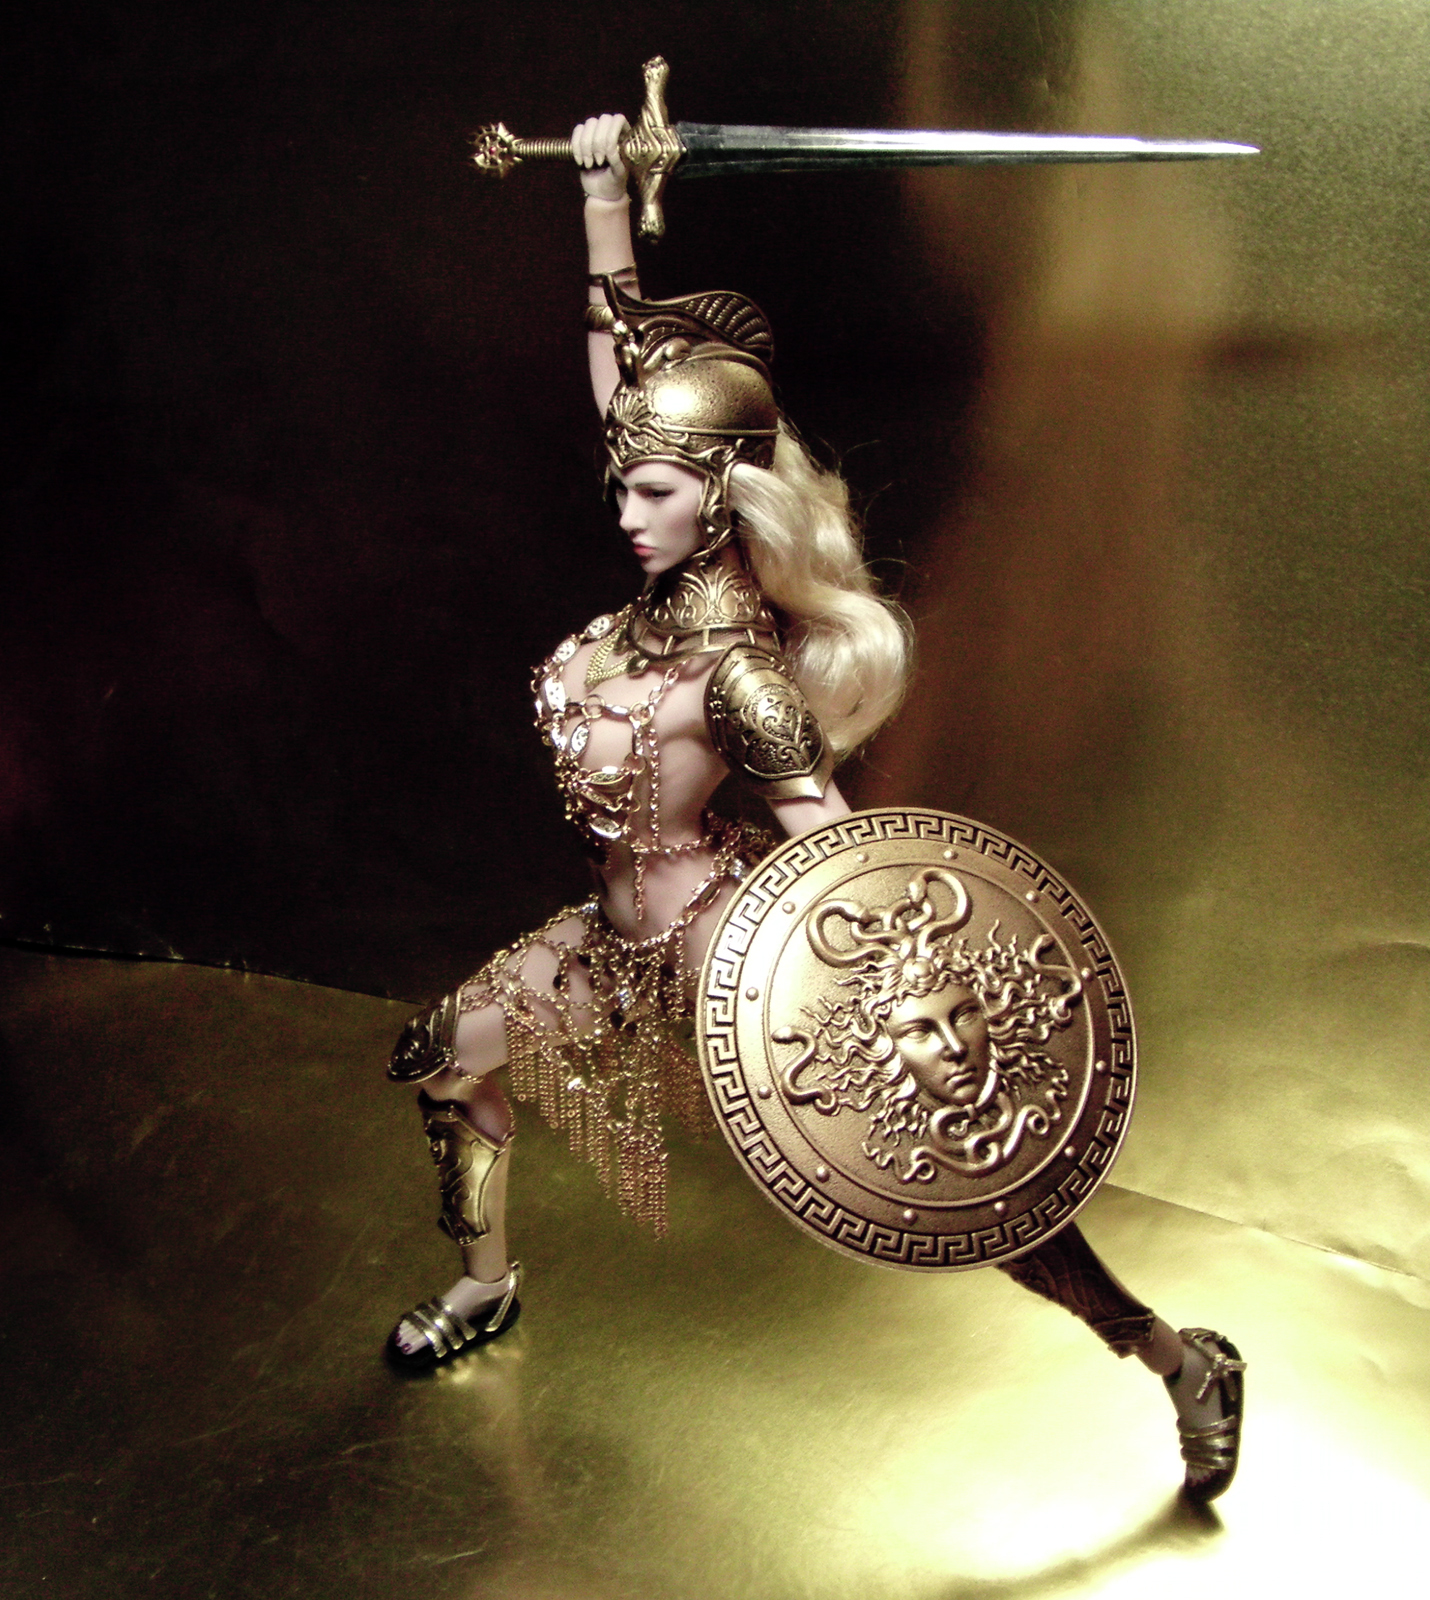 phicen dolls in the historical armor of Europe and Africa - My, Body, belly dance, Historical costume, Gladiator, Nudity, Topless, Hurrem Sultan, Decoration, Armor, Jointed doll, Phicen, Dollhouse, Youtube, Text, , Video, Longpost